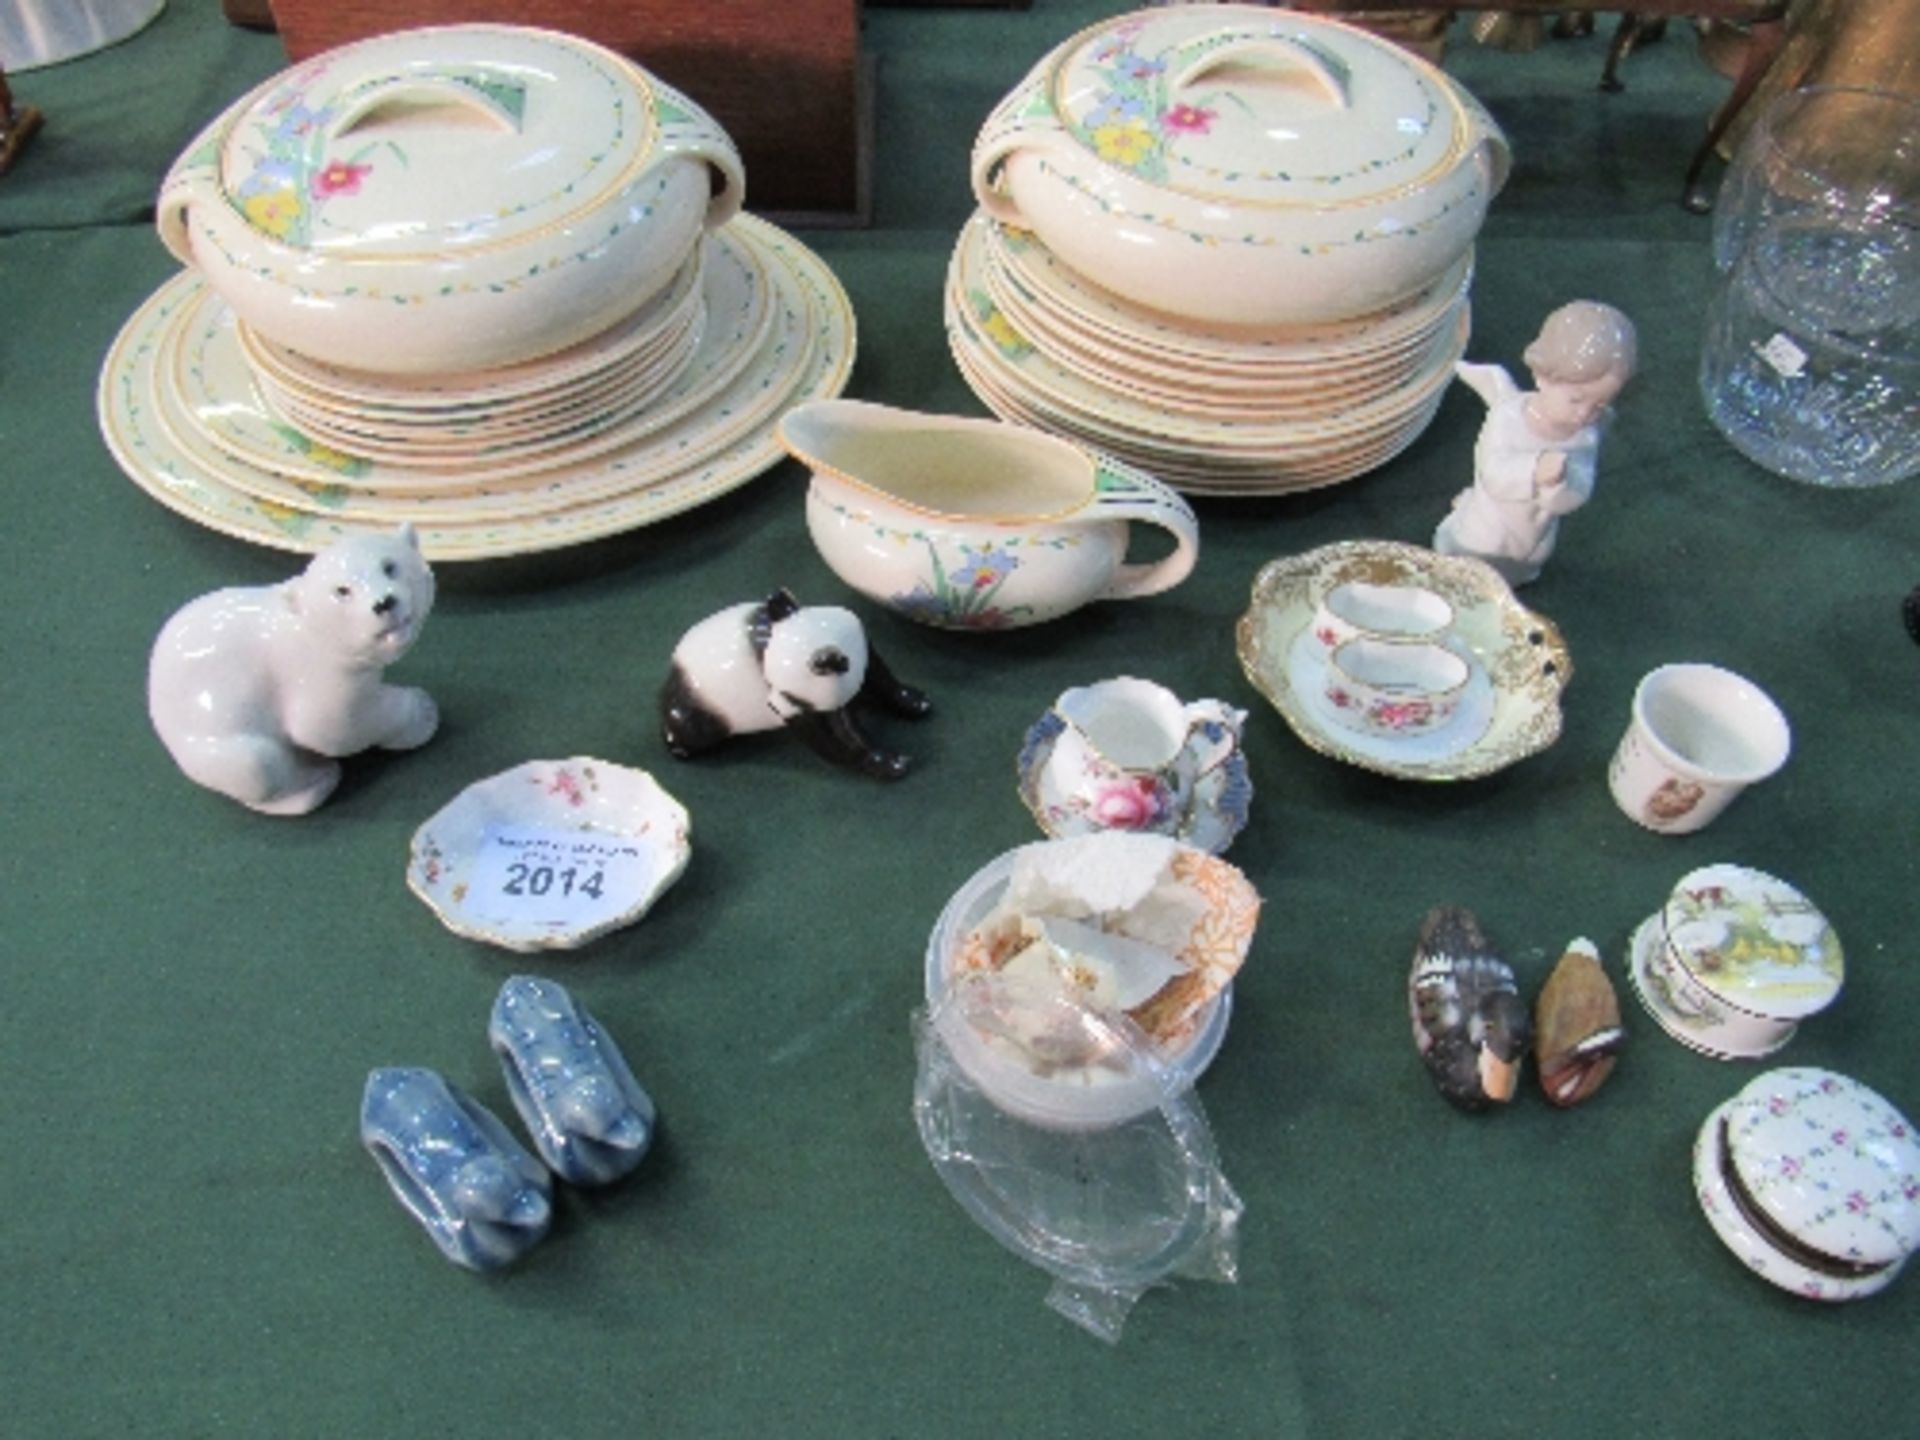 Qty of Burleigh ware, hand painted Art Deco style part dinner ware & various small ornaments